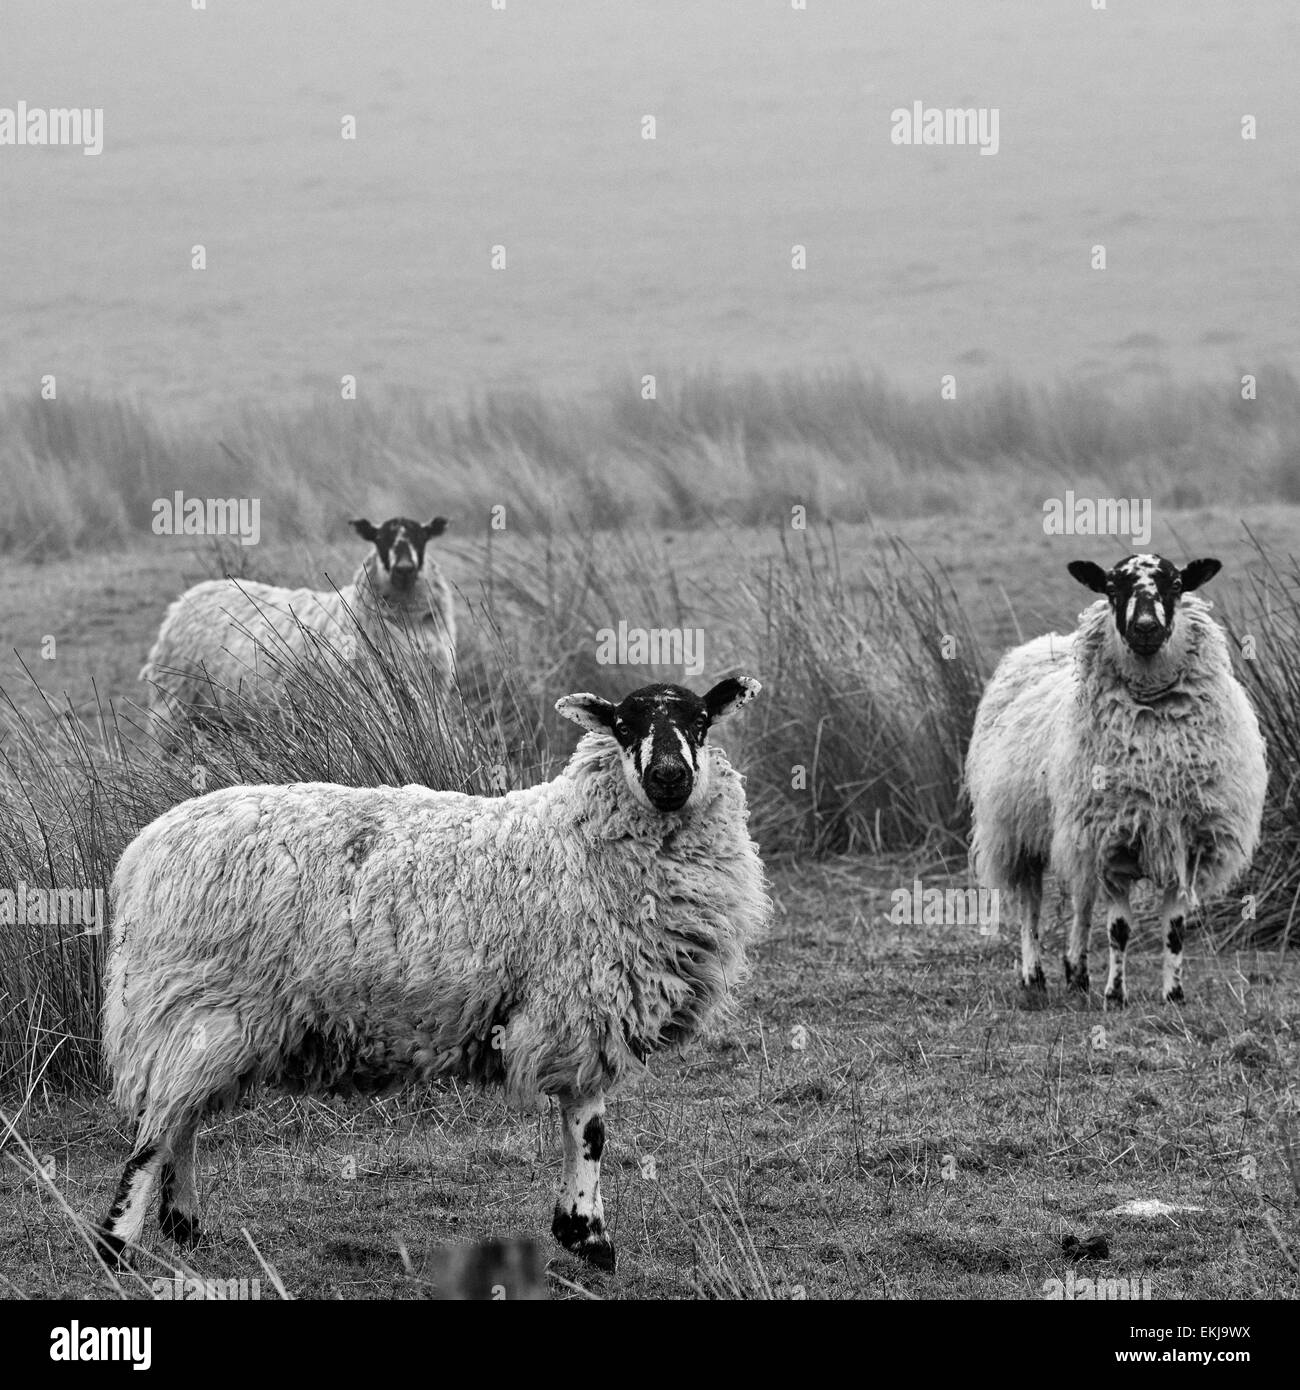 Black & White shot of 3 sheep in the mist on Dent fell, Cumbria, England. All alert facing the camera. Stock Photo